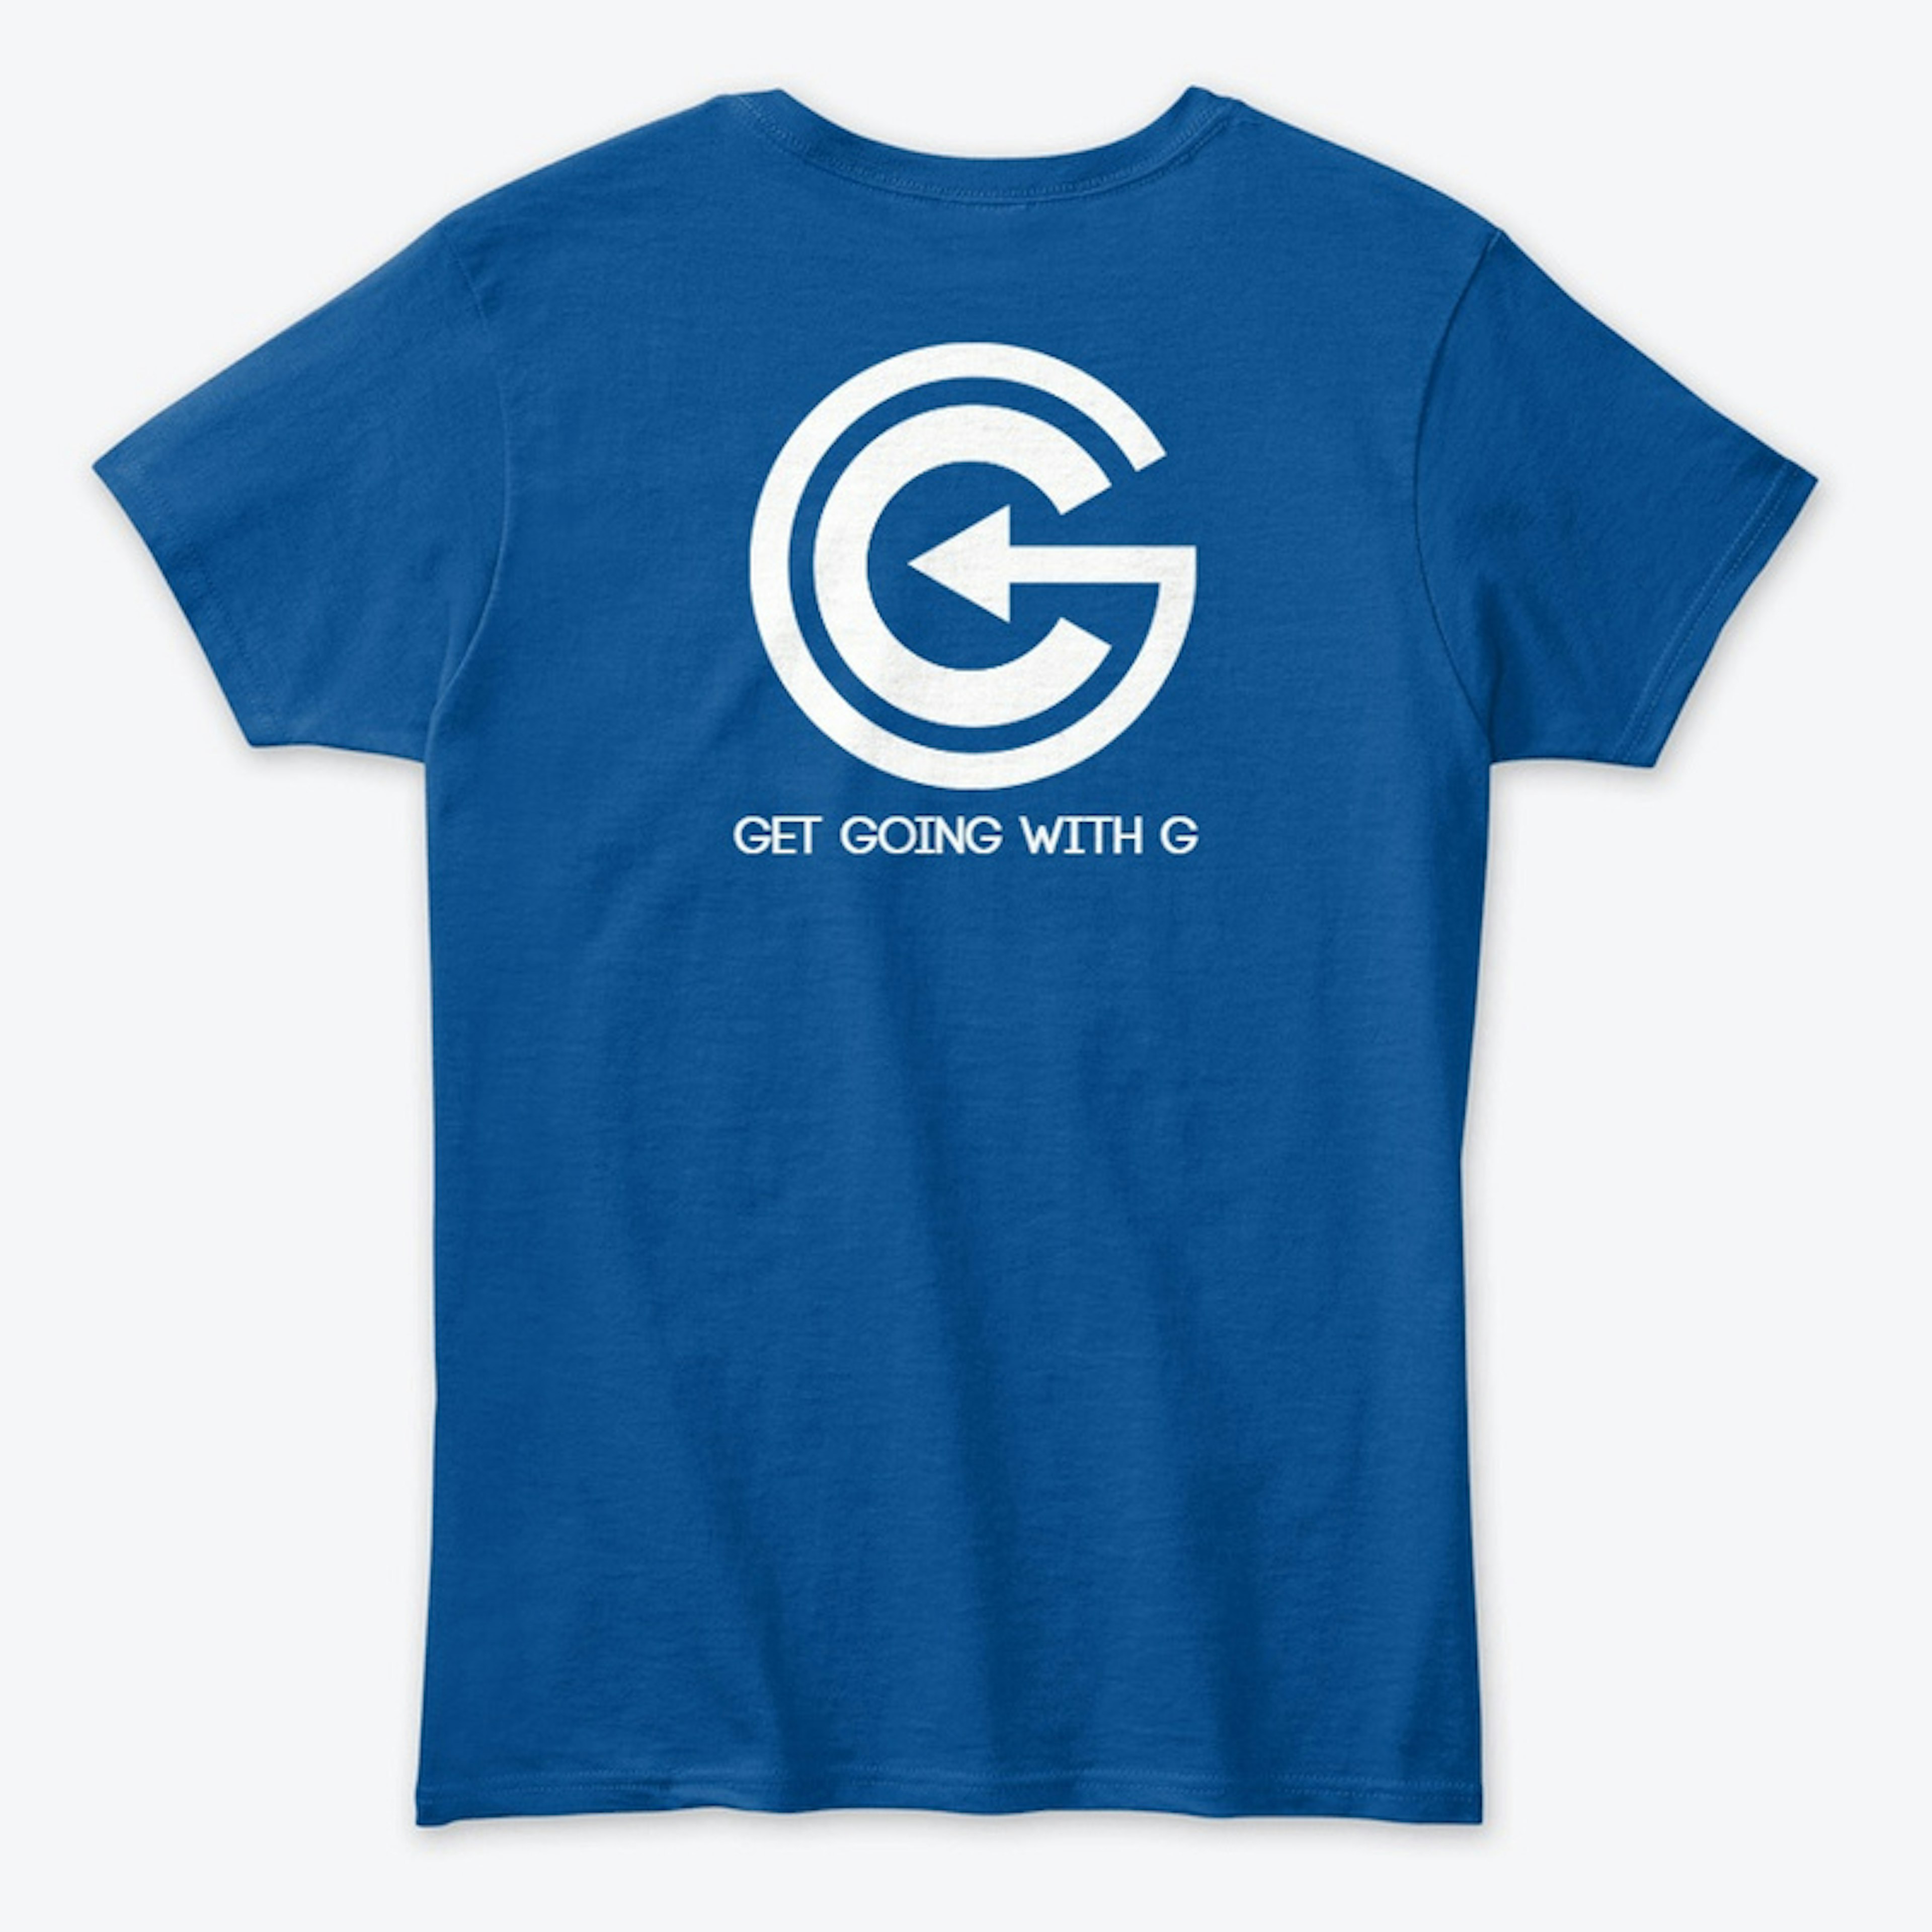 Get Going with G